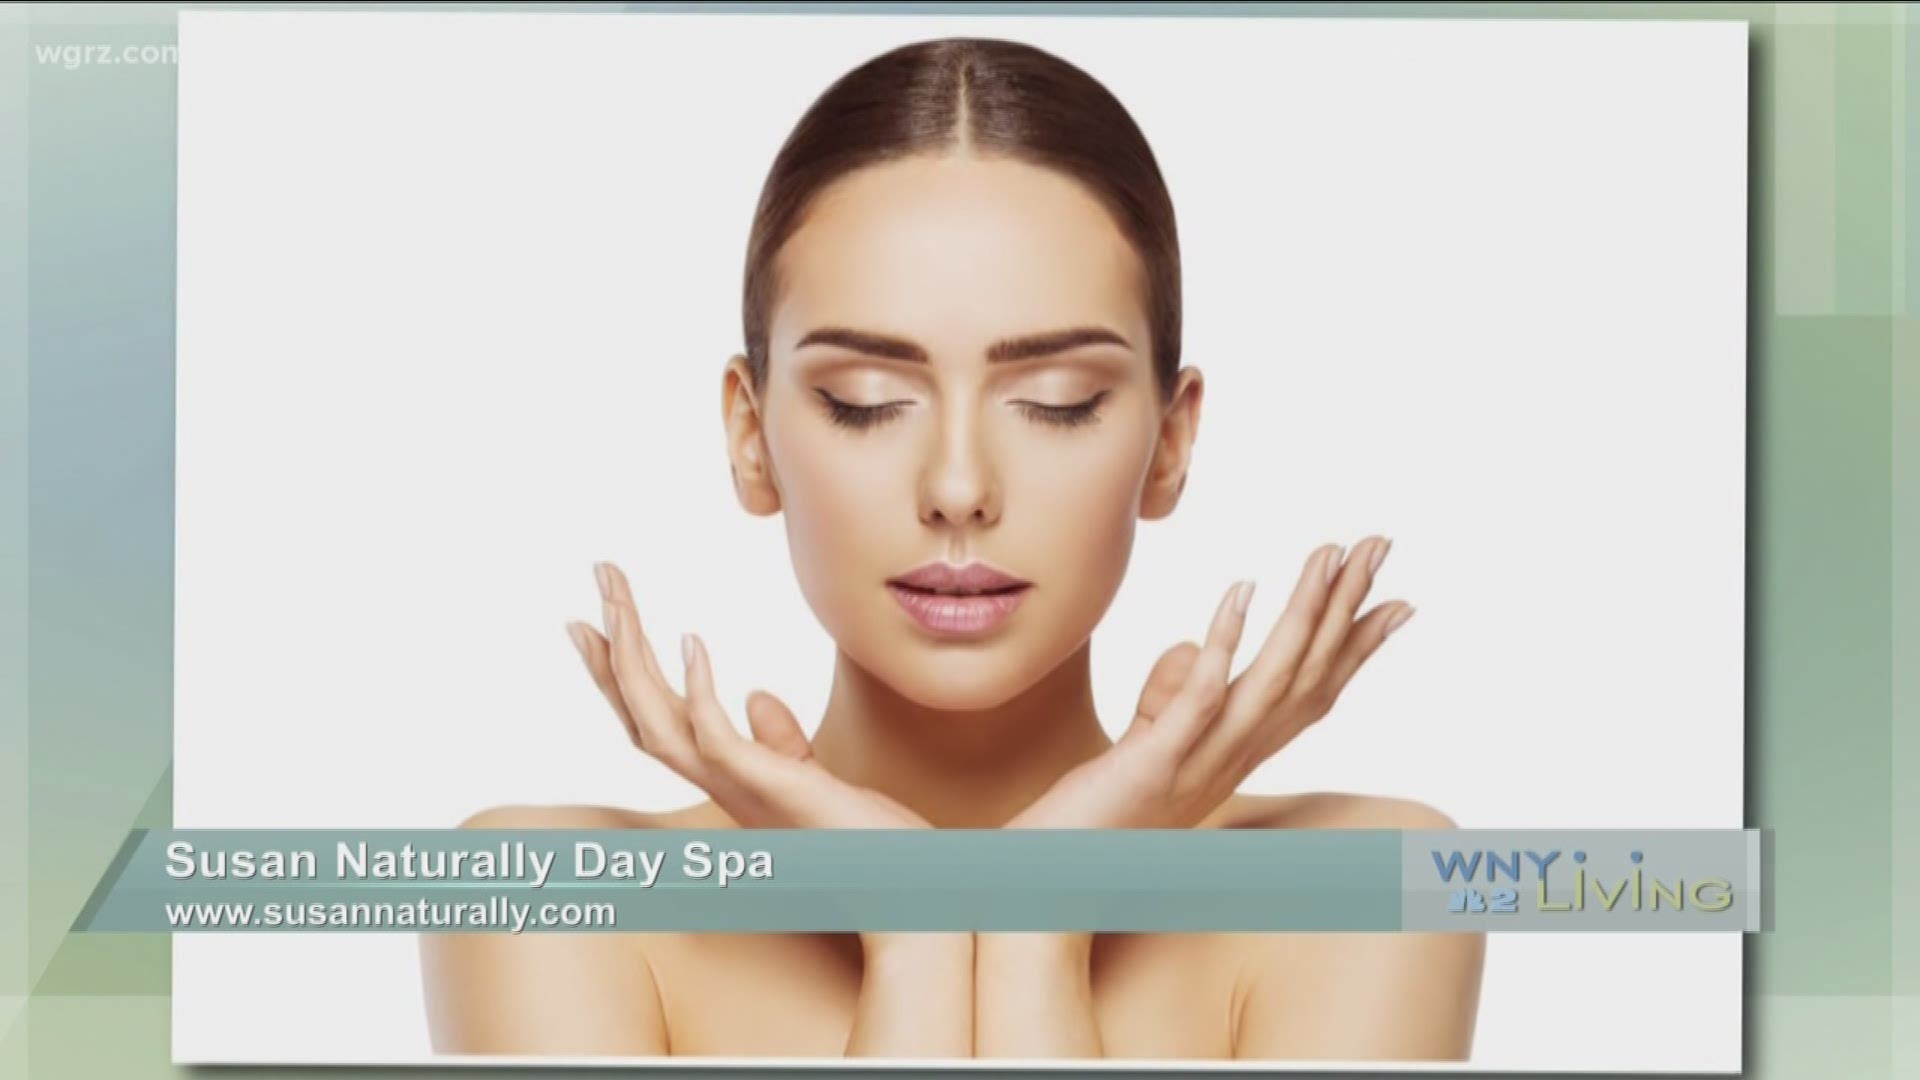 WNY Living - May 25 - Susan Naturally Day Spa (SPONSORED CONTENT)